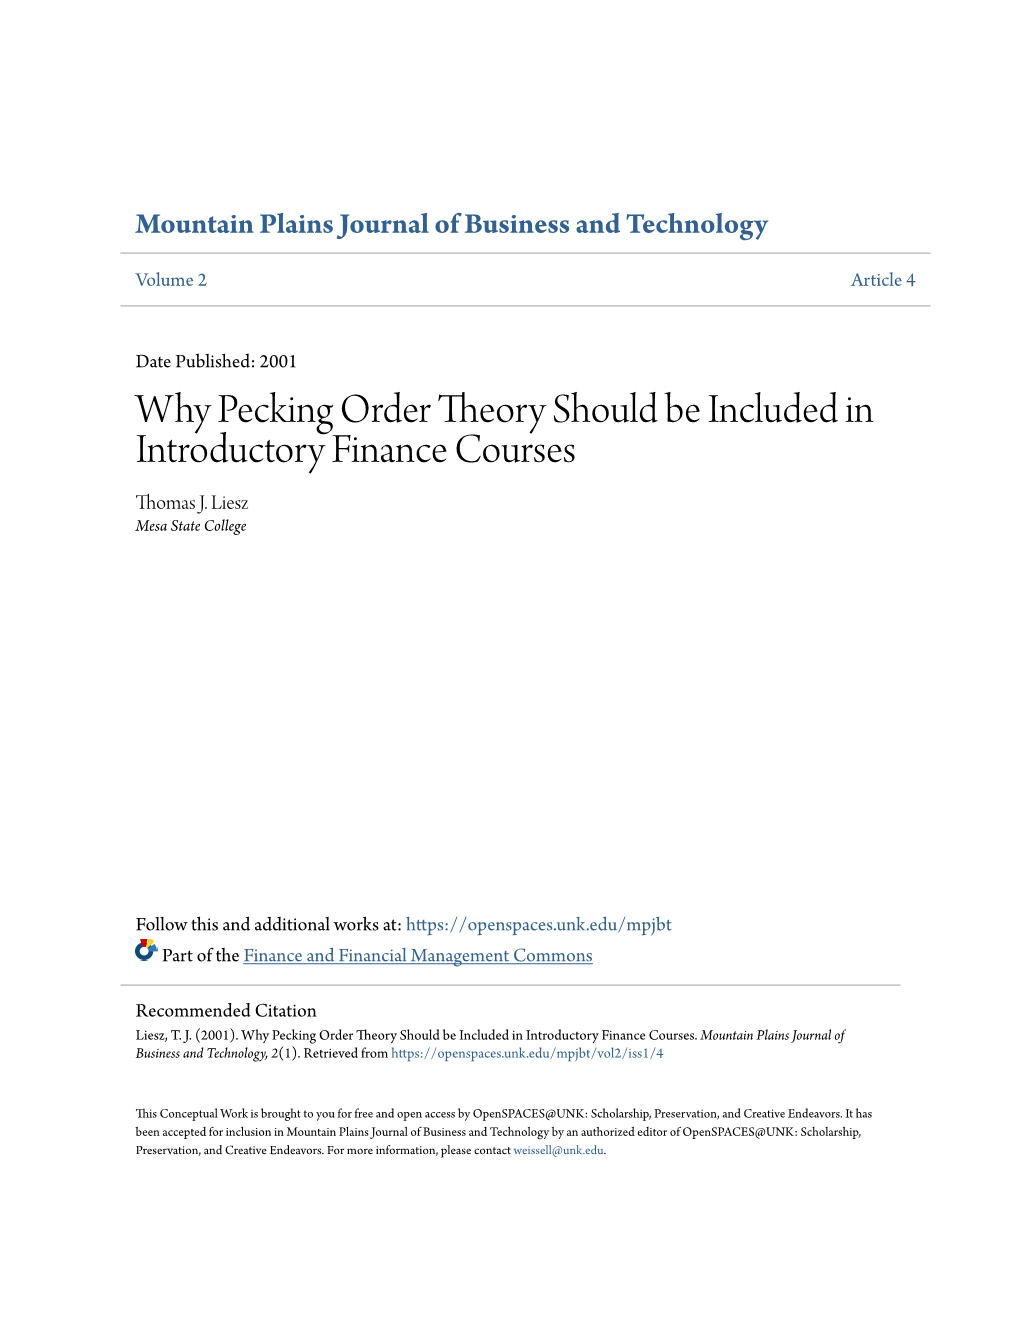 Why Pecking Order Theory Should Be Included in Introductory Finance Courses Thomas J